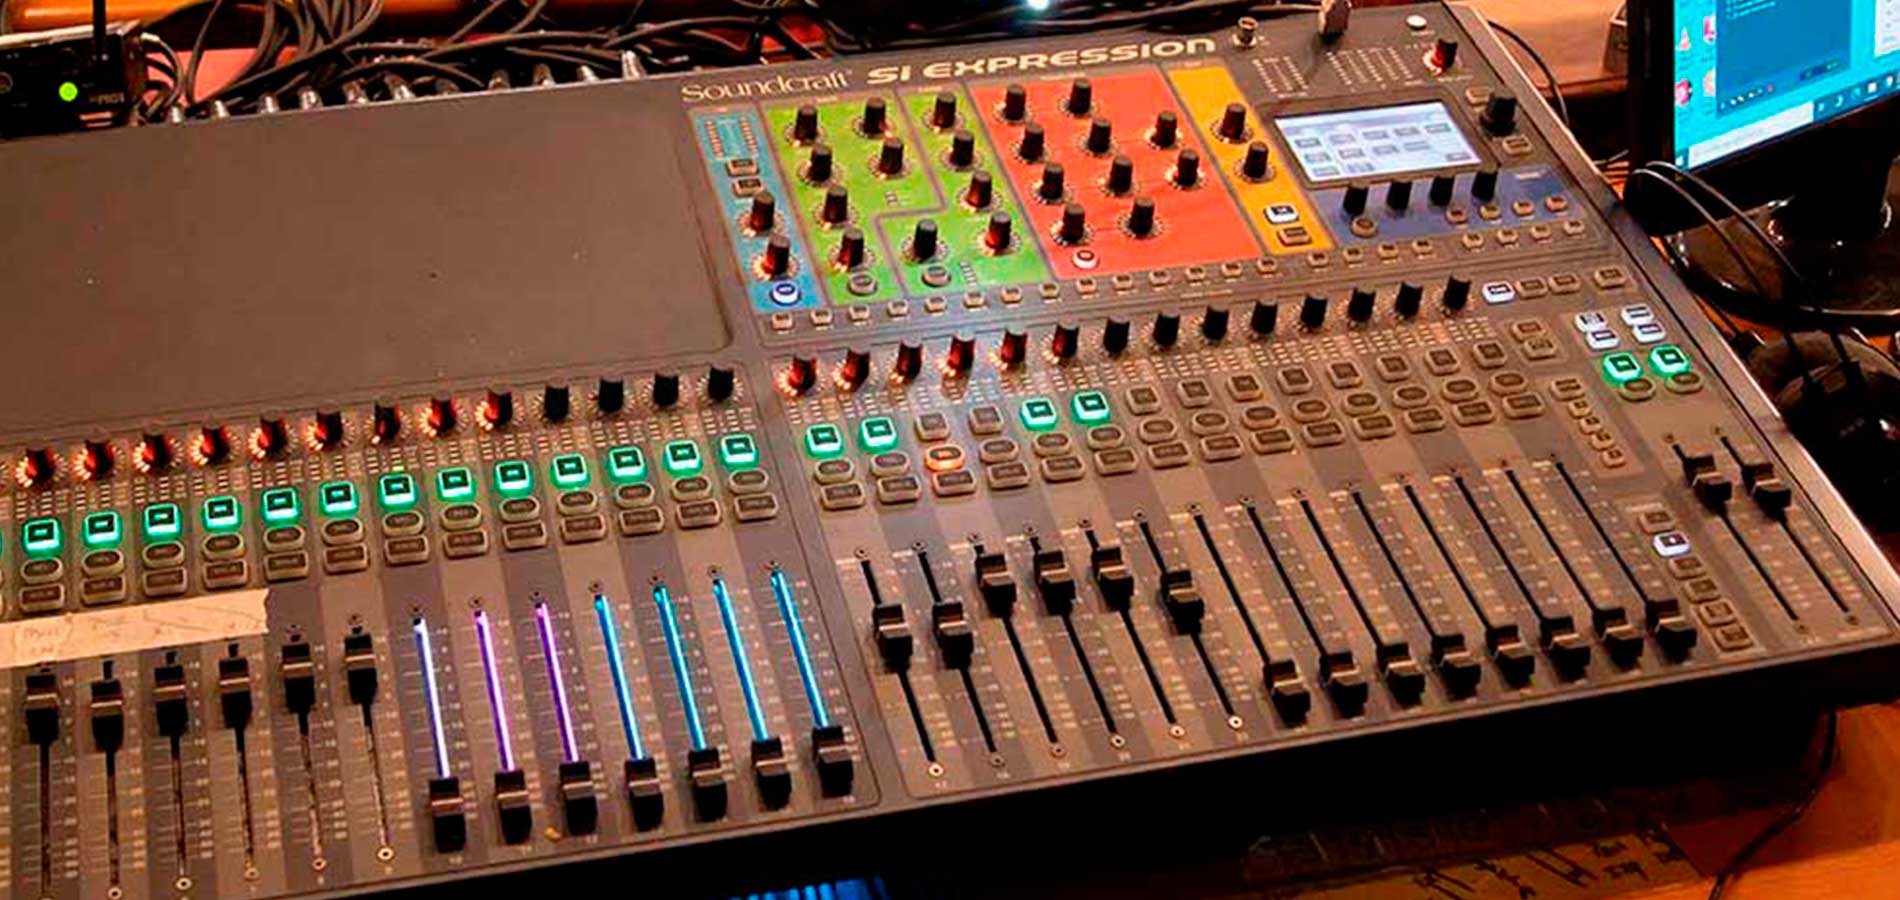 Consola Soundcraft Si Expression 3 32 canales